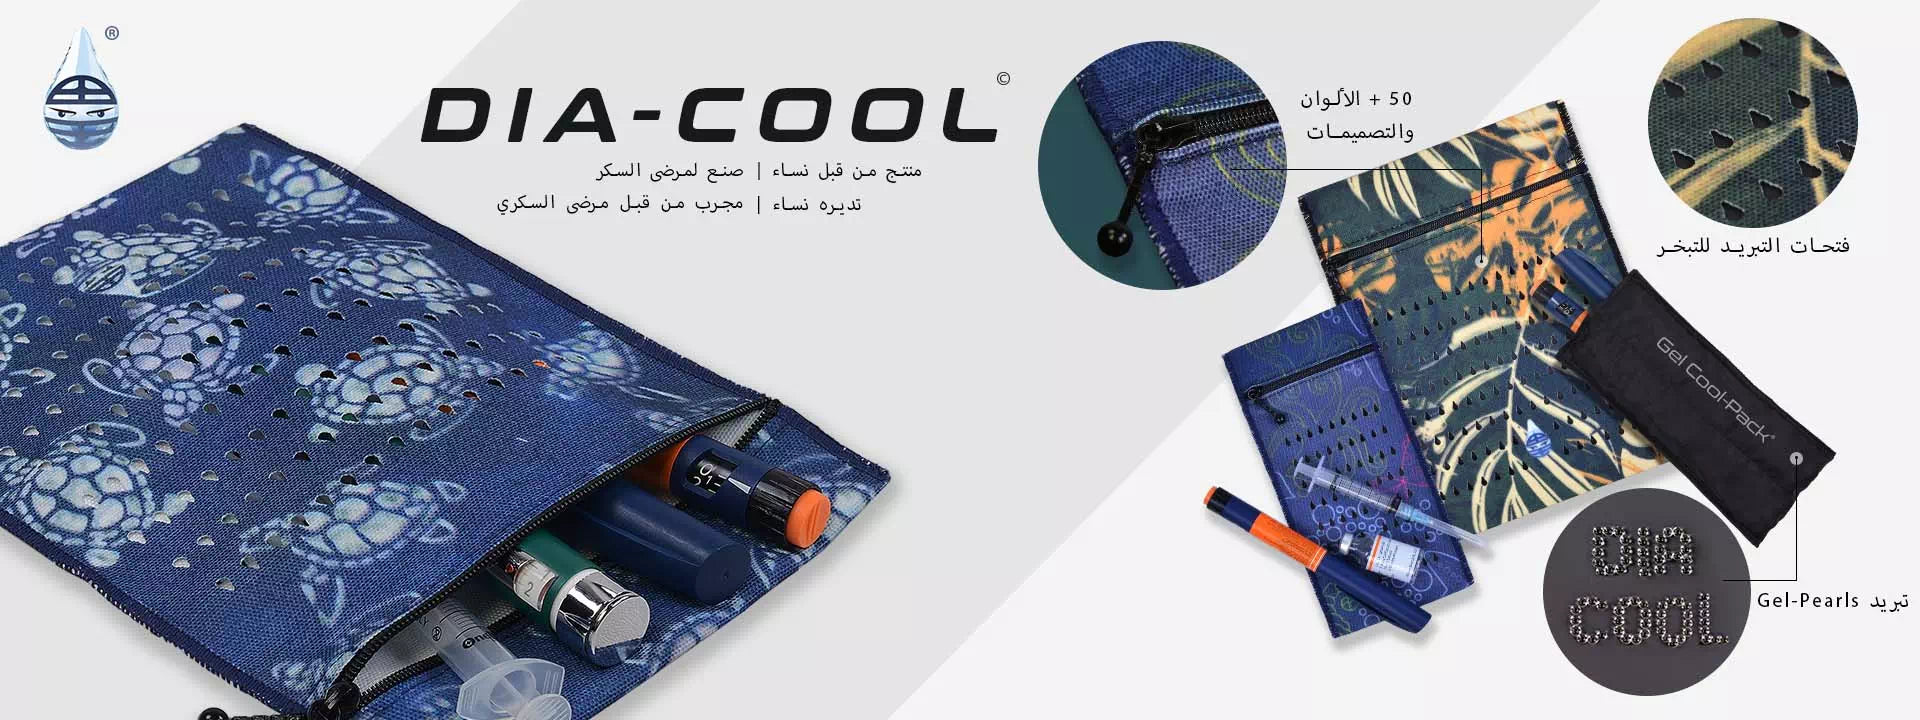 dia-cool cooling case for insulin pen